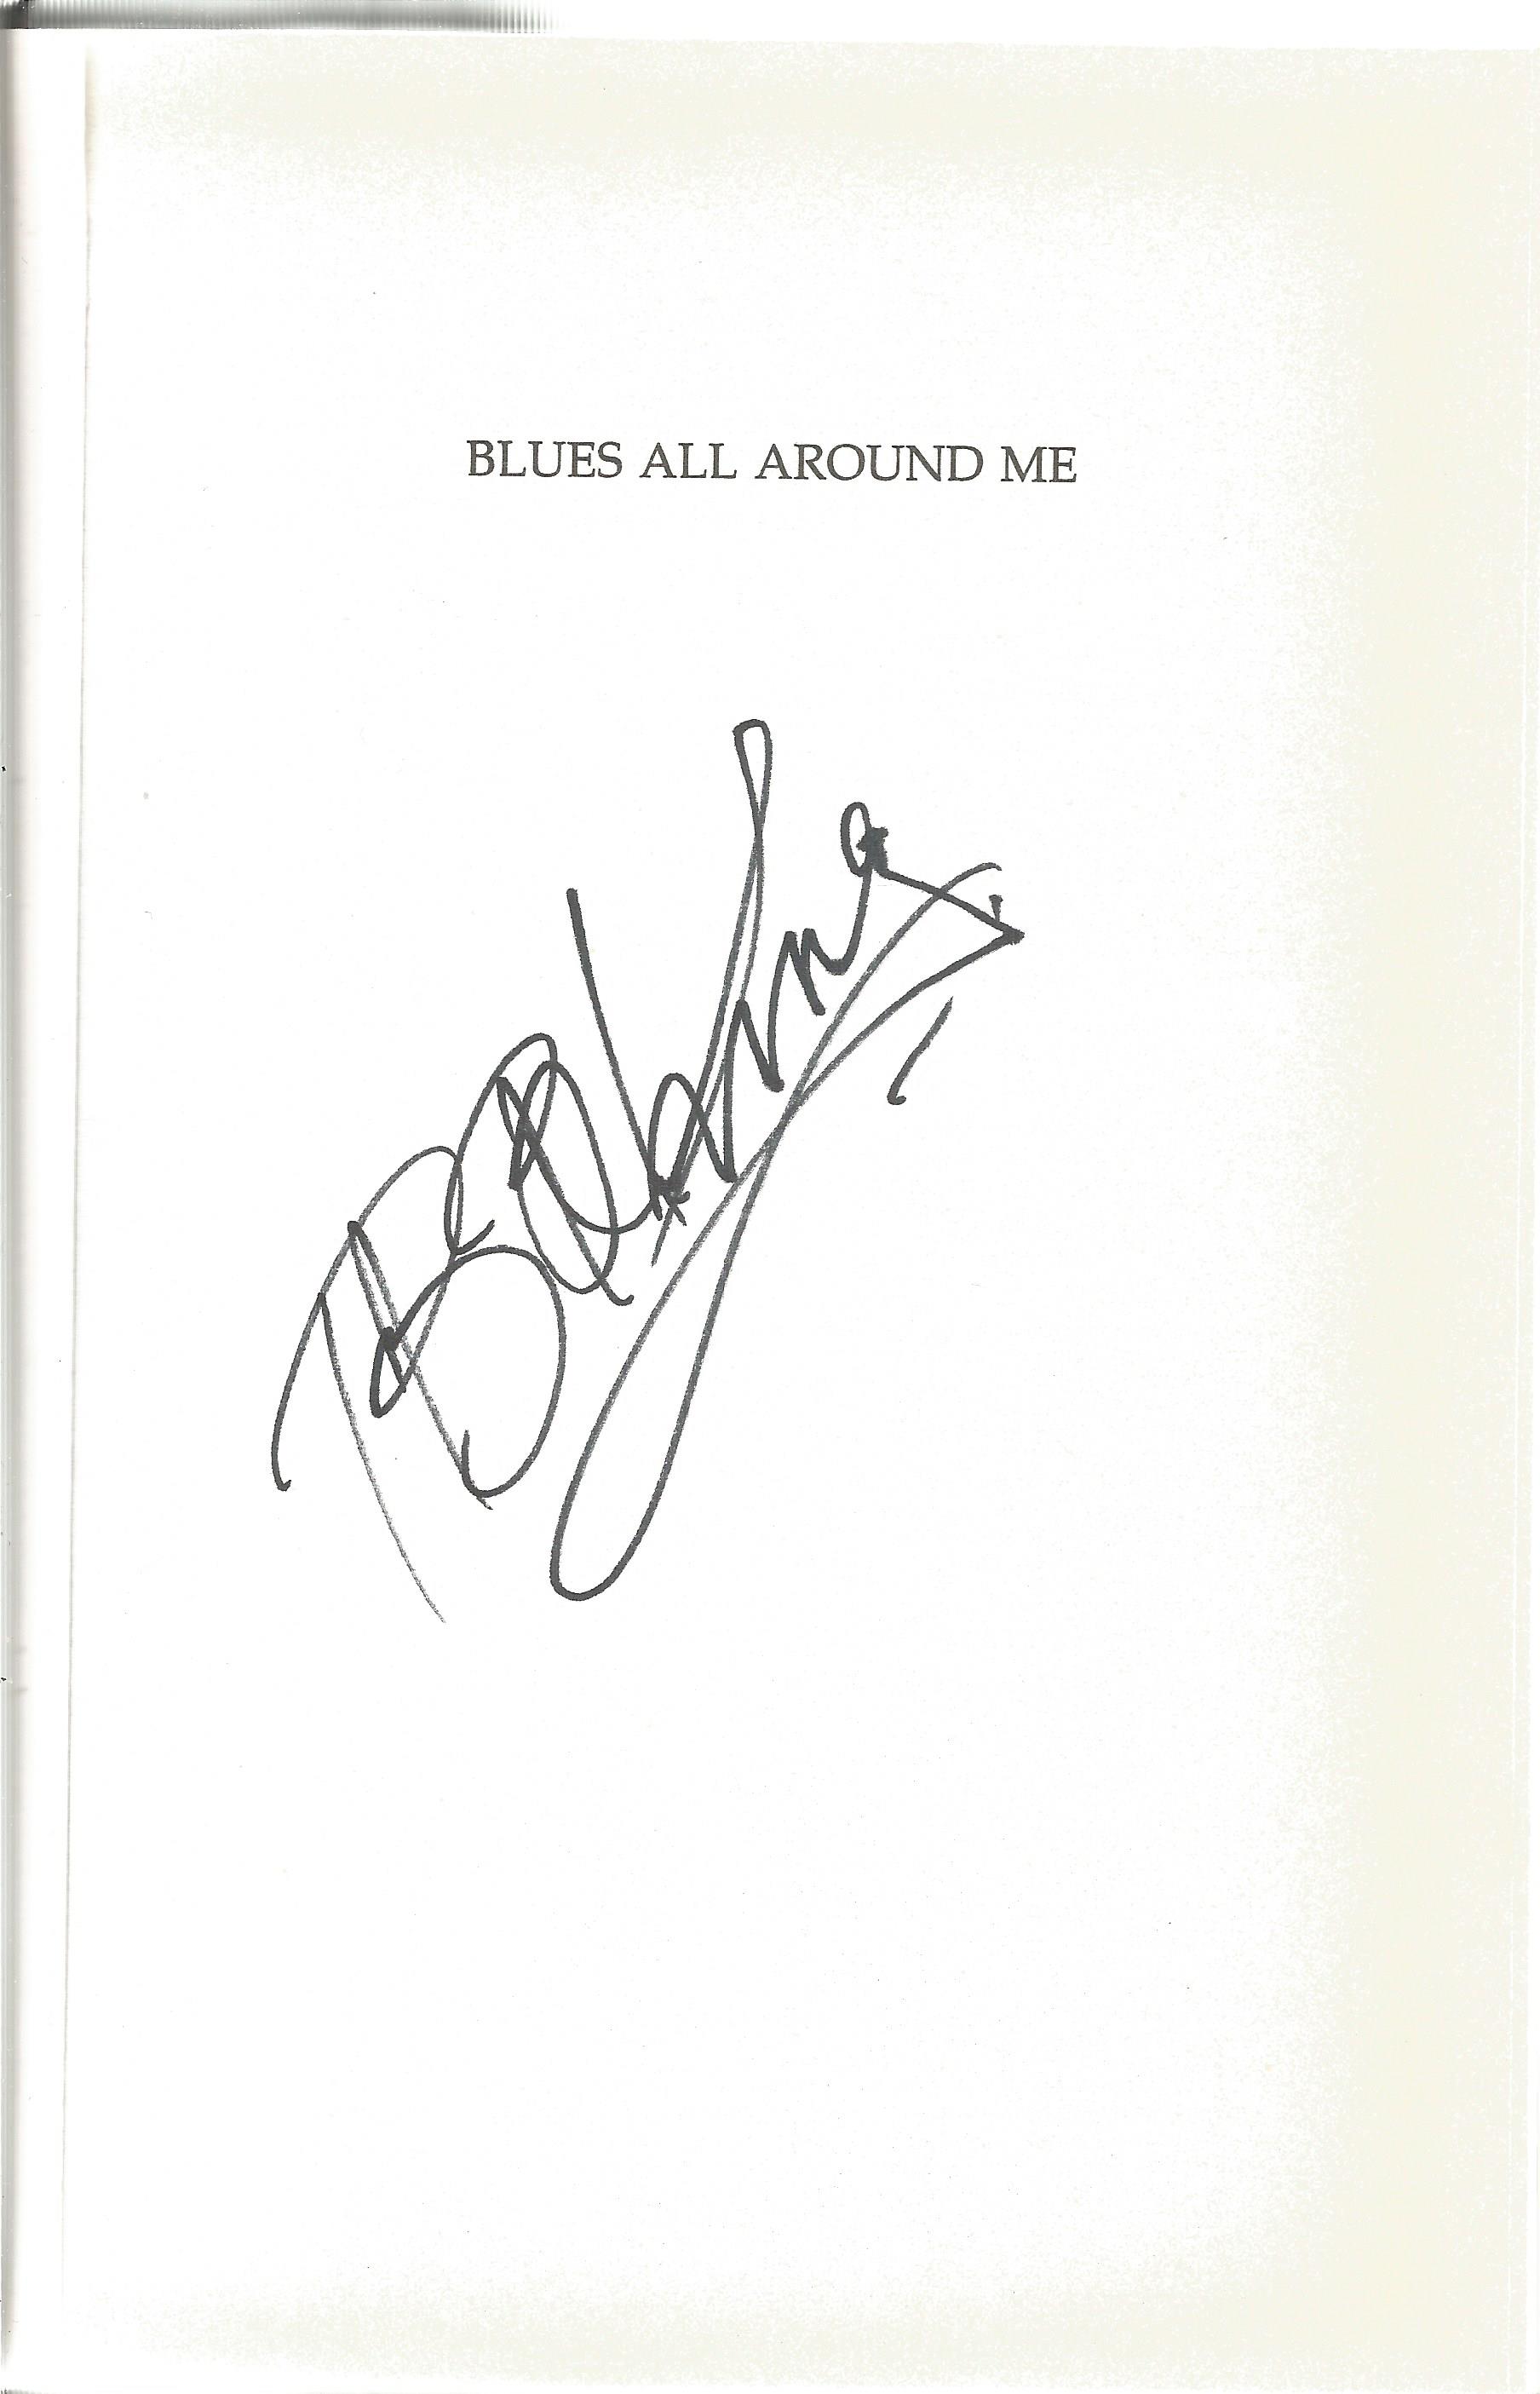 B. B King hardback book titled Blues All Around Me signed on the inside title page. Good